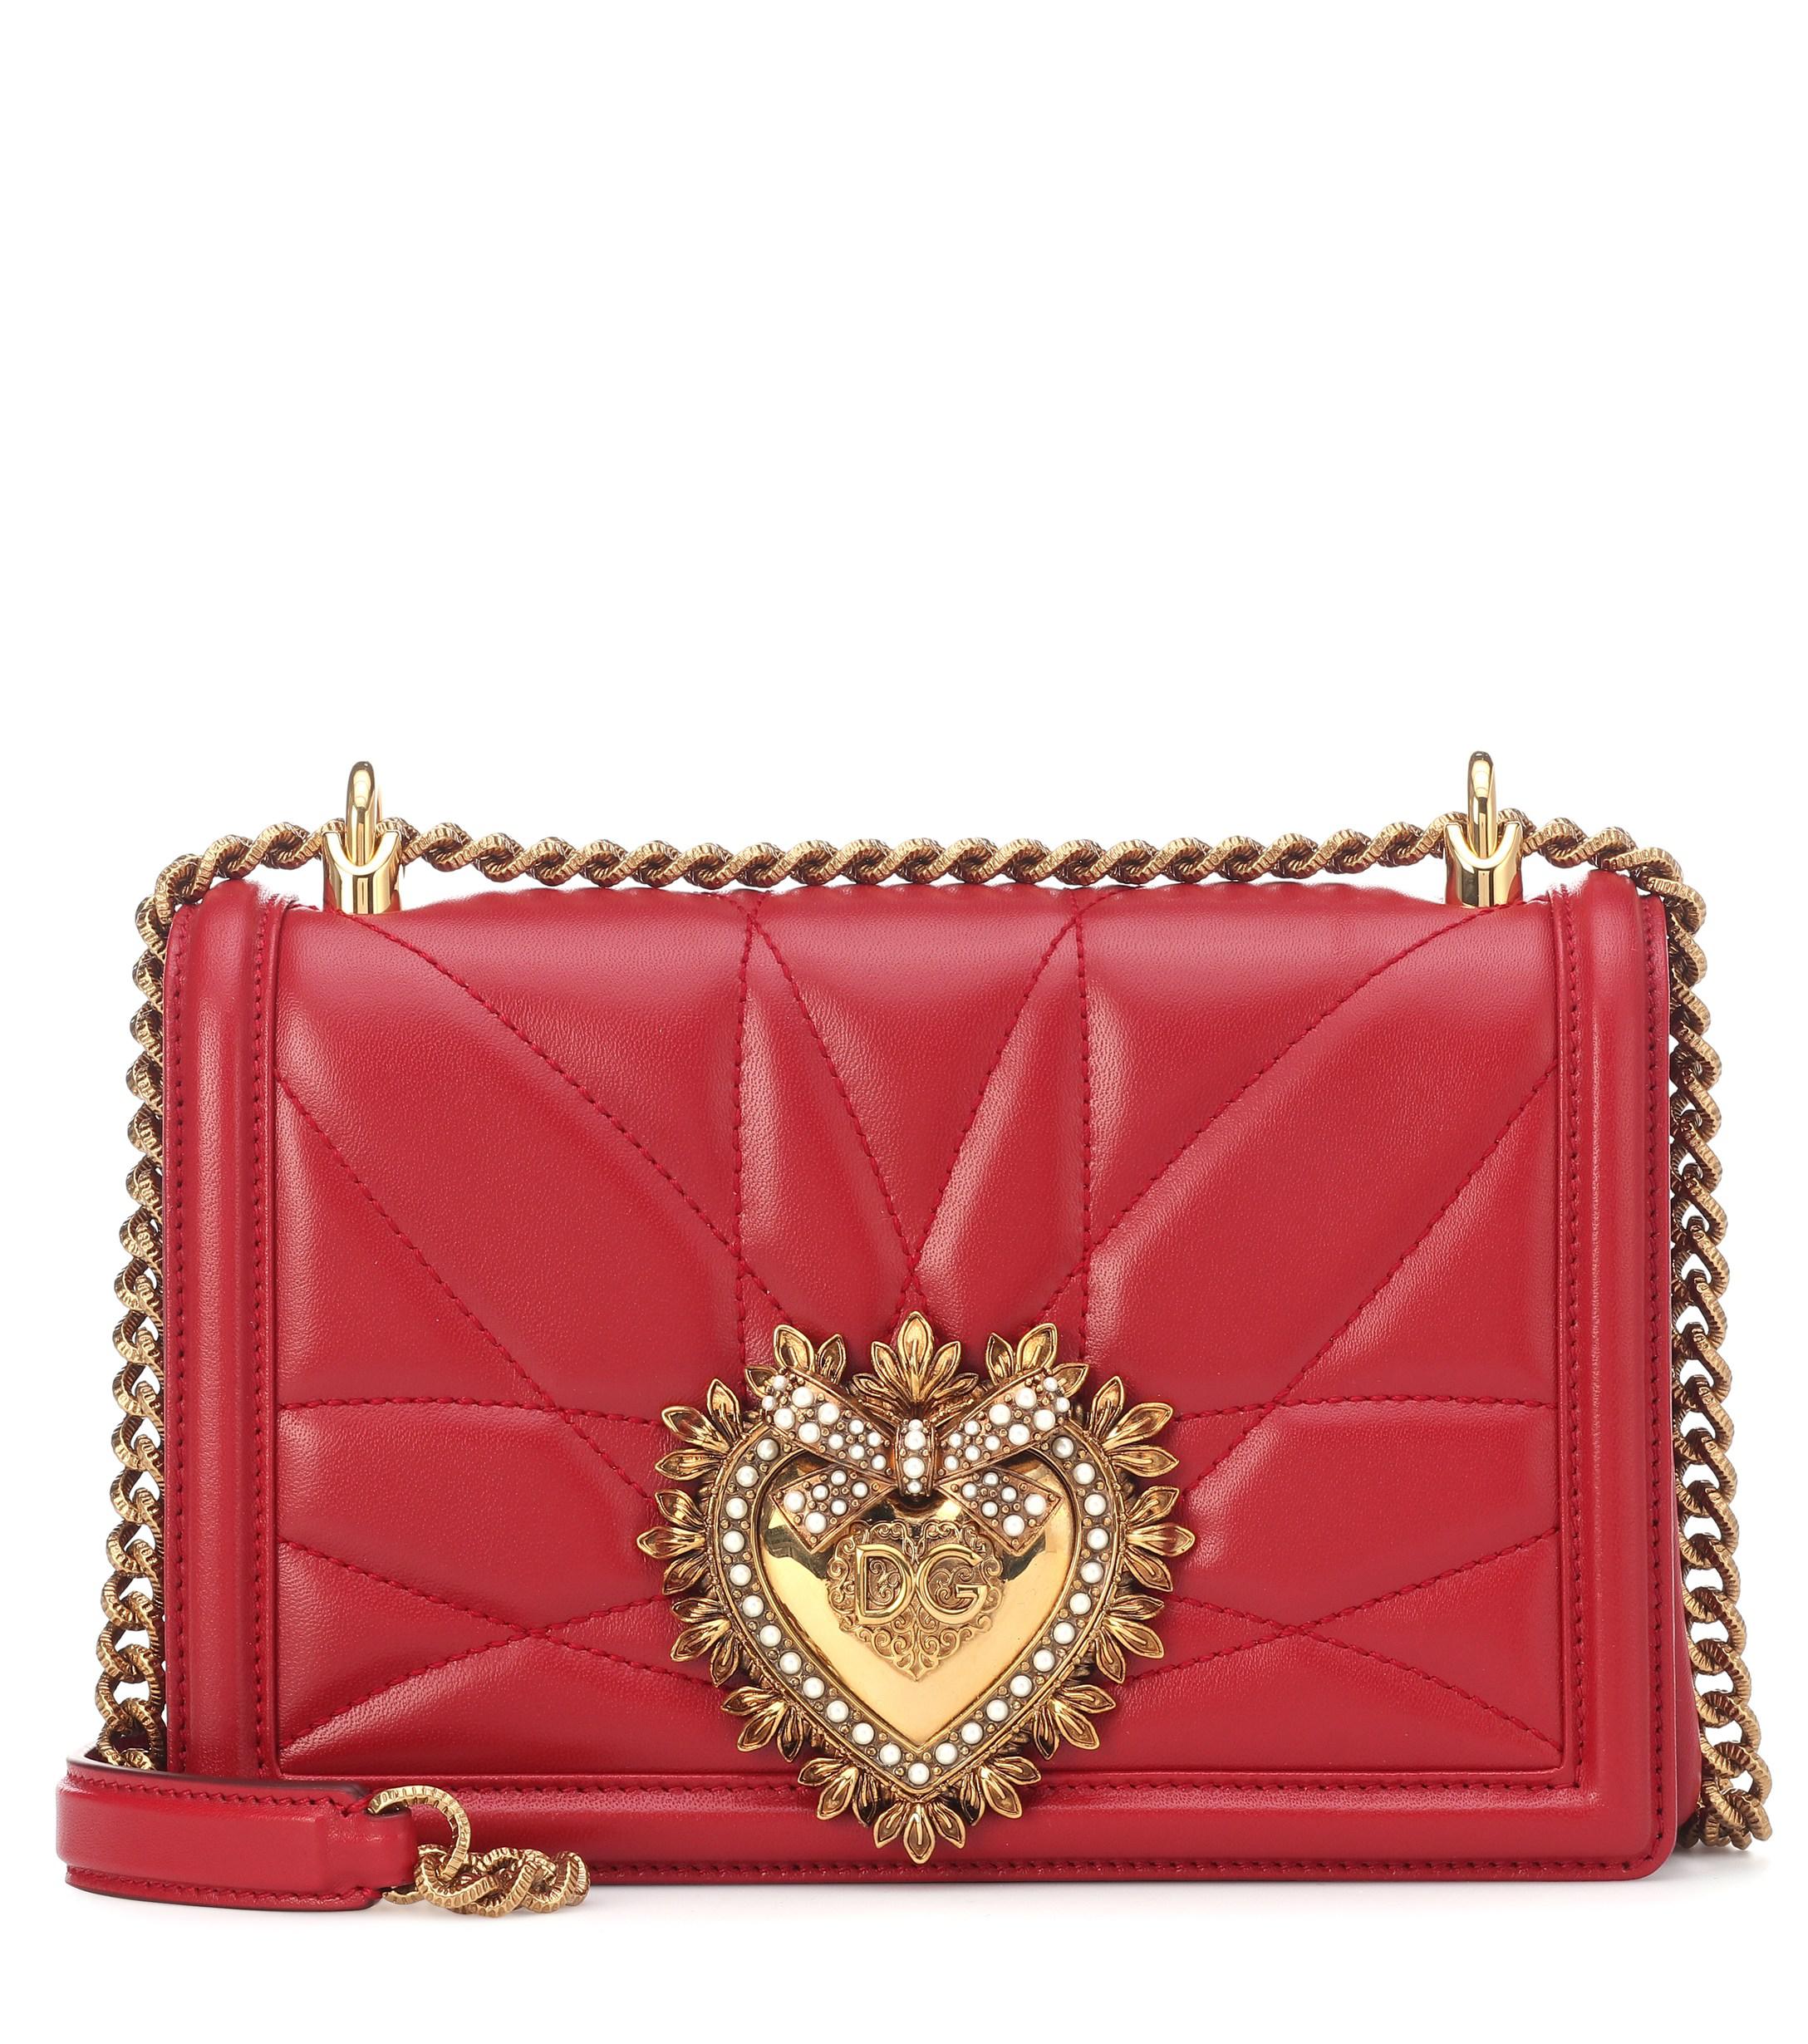 Dolce & Gabbana Small Devotion Quilted Leather Bag in Red - Save 36% - Lyst